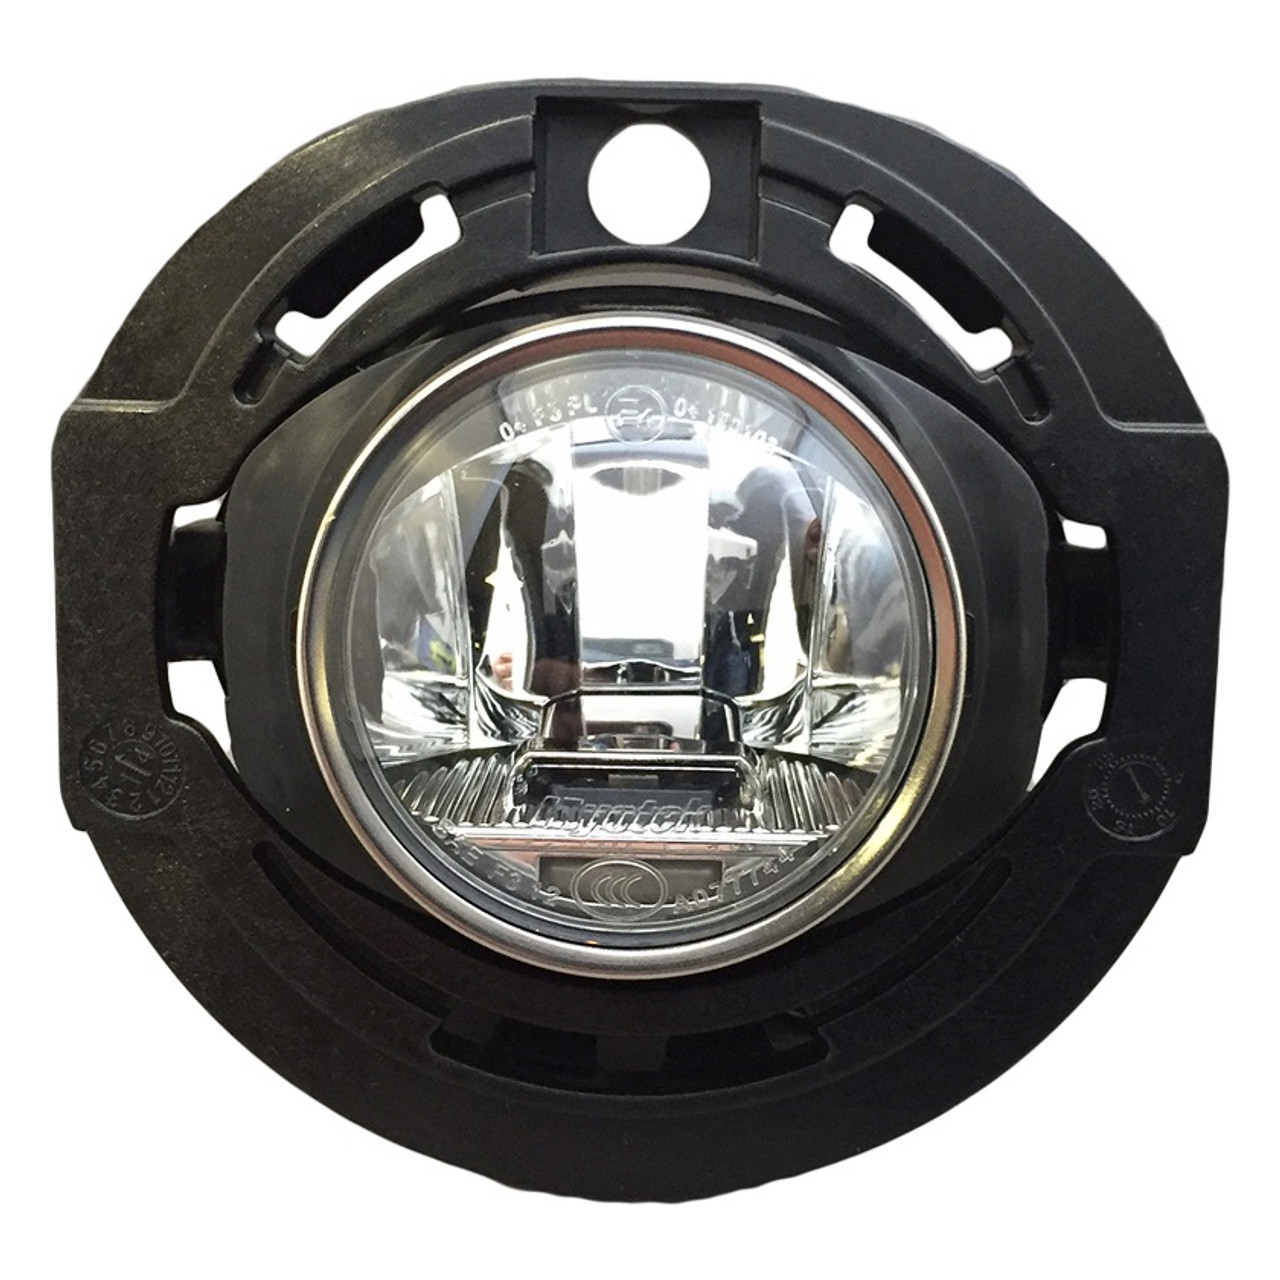 Mopar Part #68228884ac Front LED Fog Light for Chrysler 300, Dodge Charger, and Jeep Grand Cherokee 2015-2018